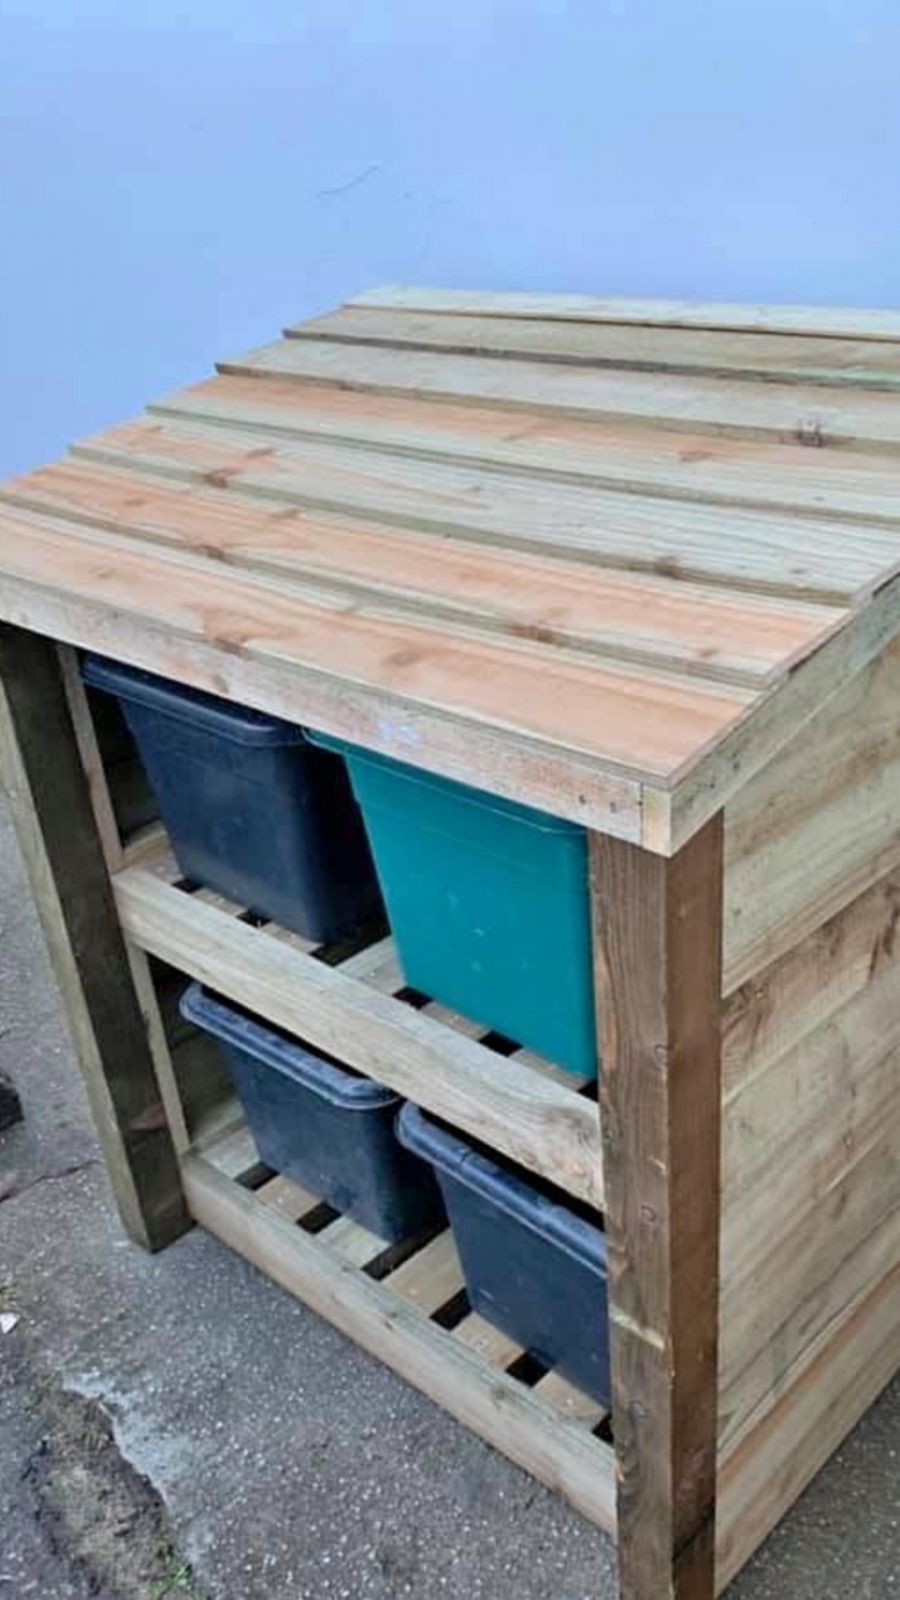 Effective and neat storage for recycling boxes